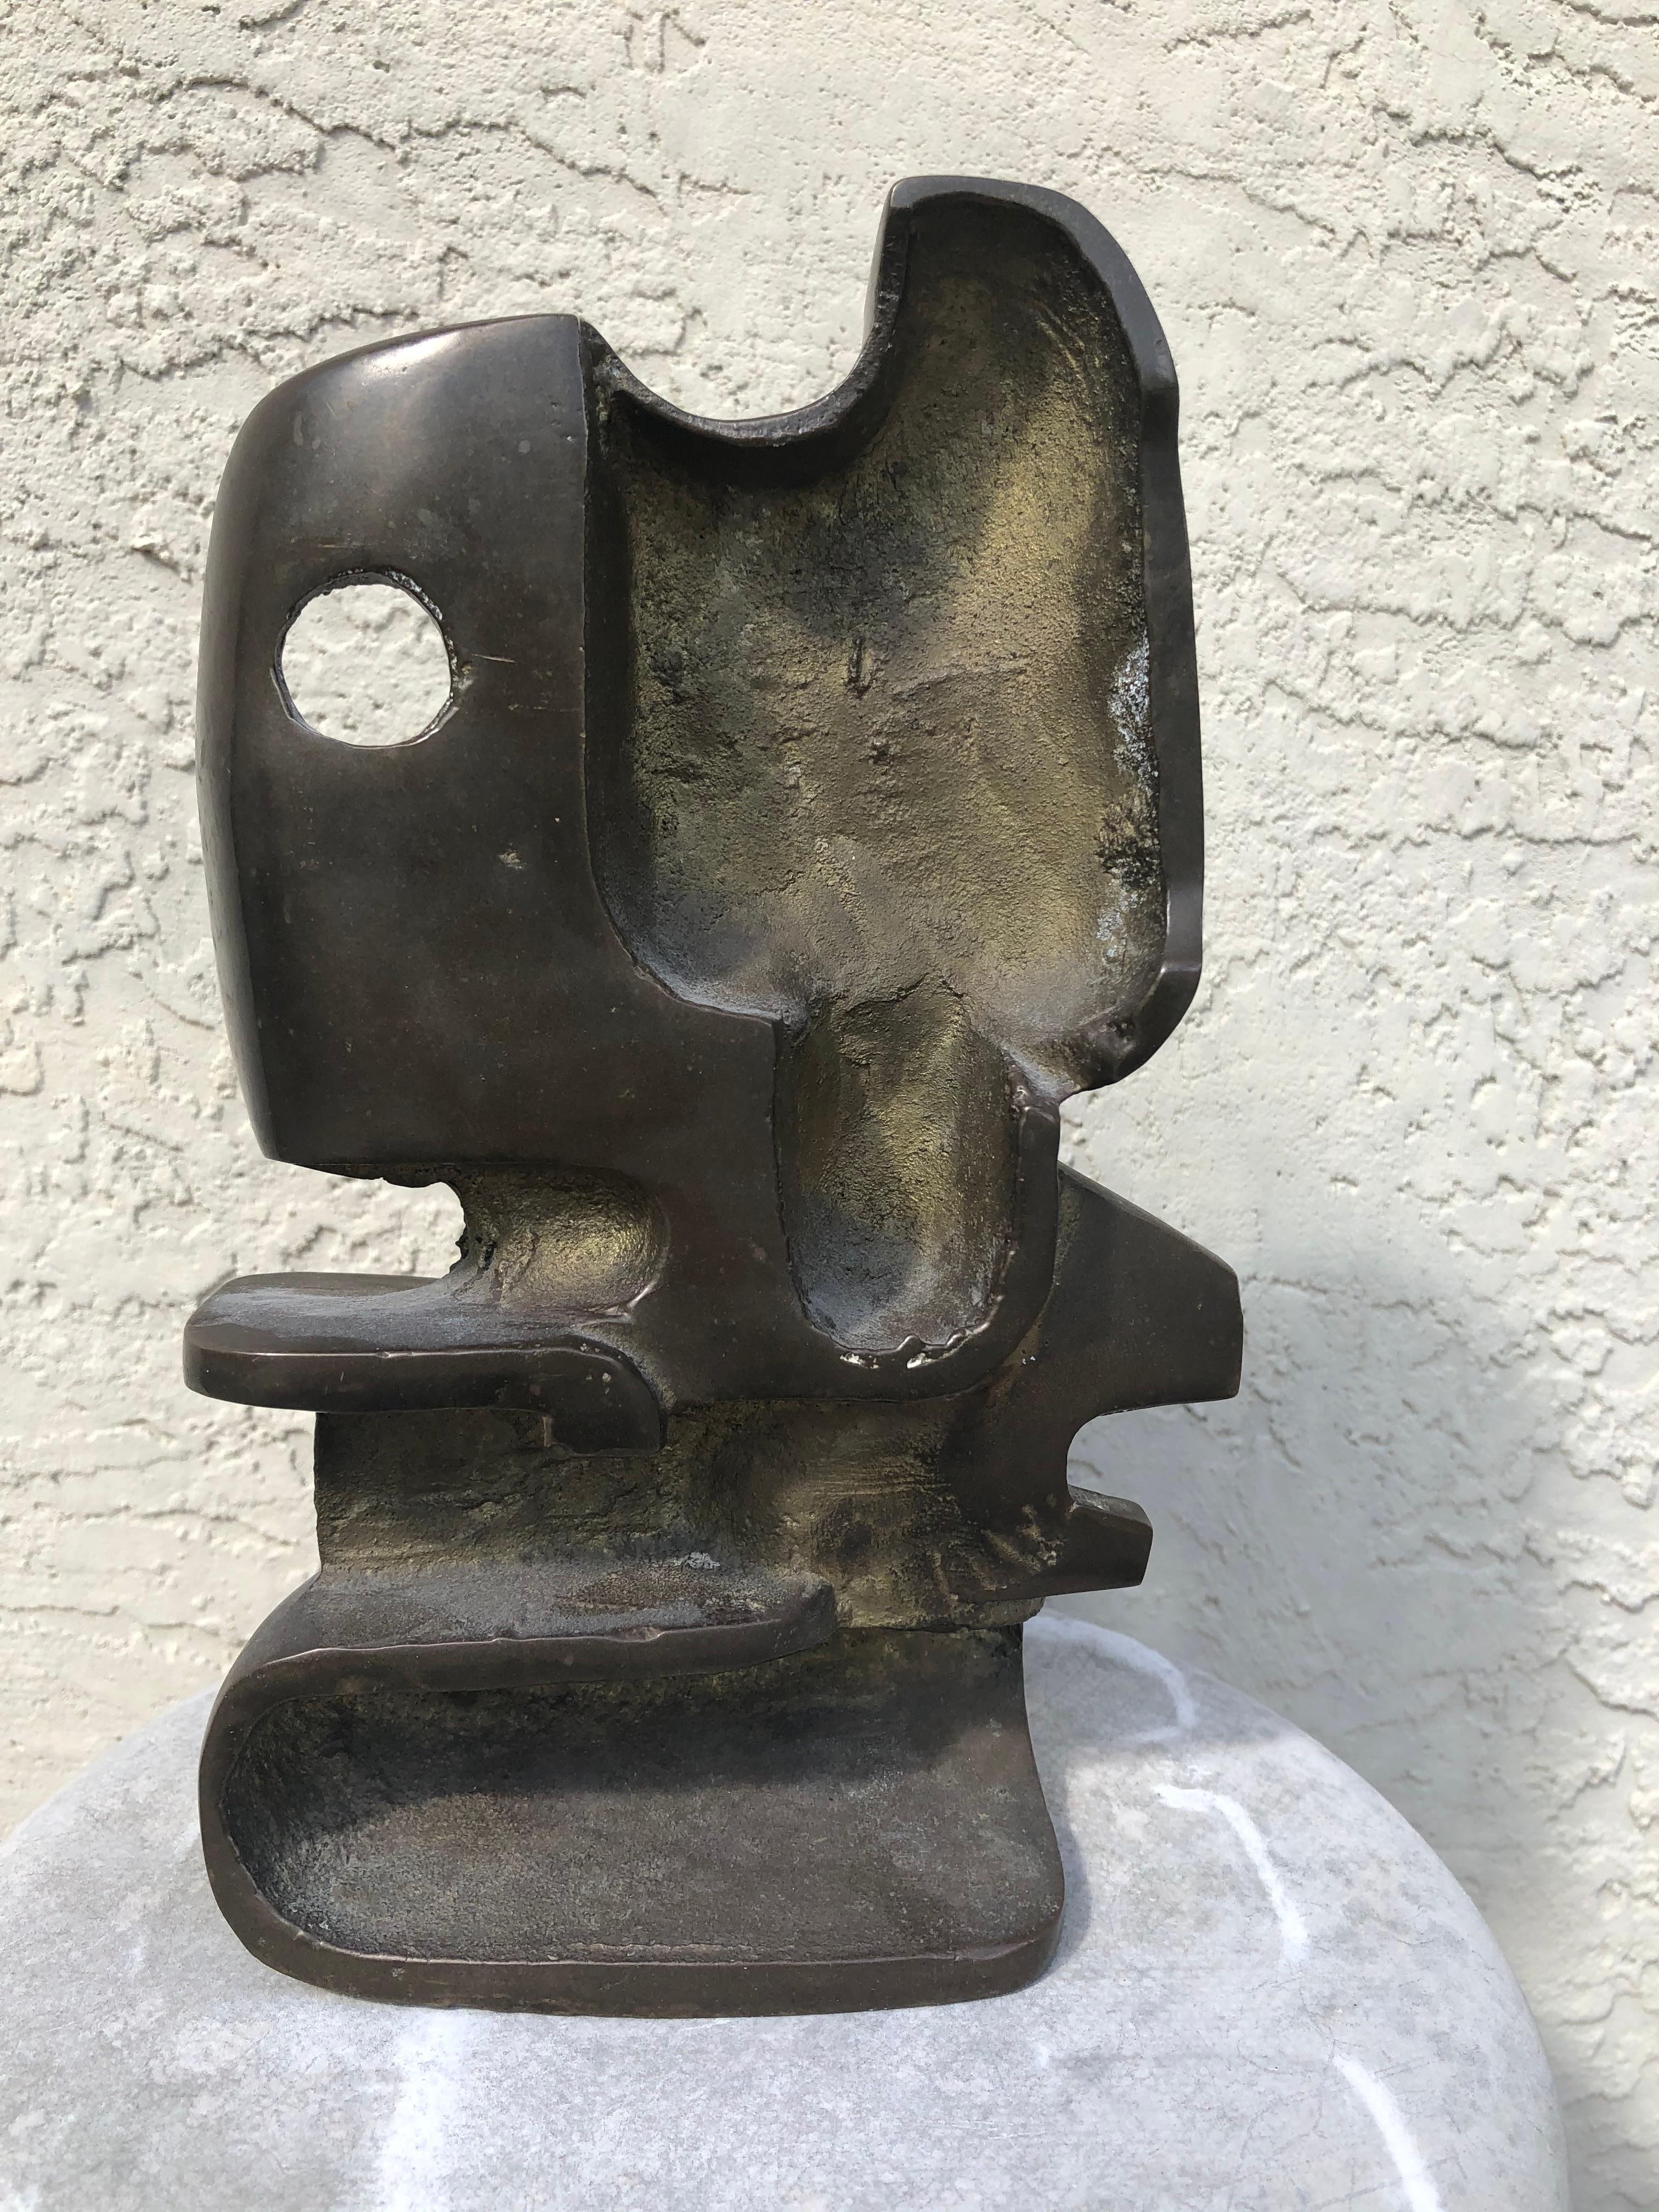  Mystery abstract bronze masterpiece. It is signed but cannot make it out. Appears to be numbered 18 out of 20.